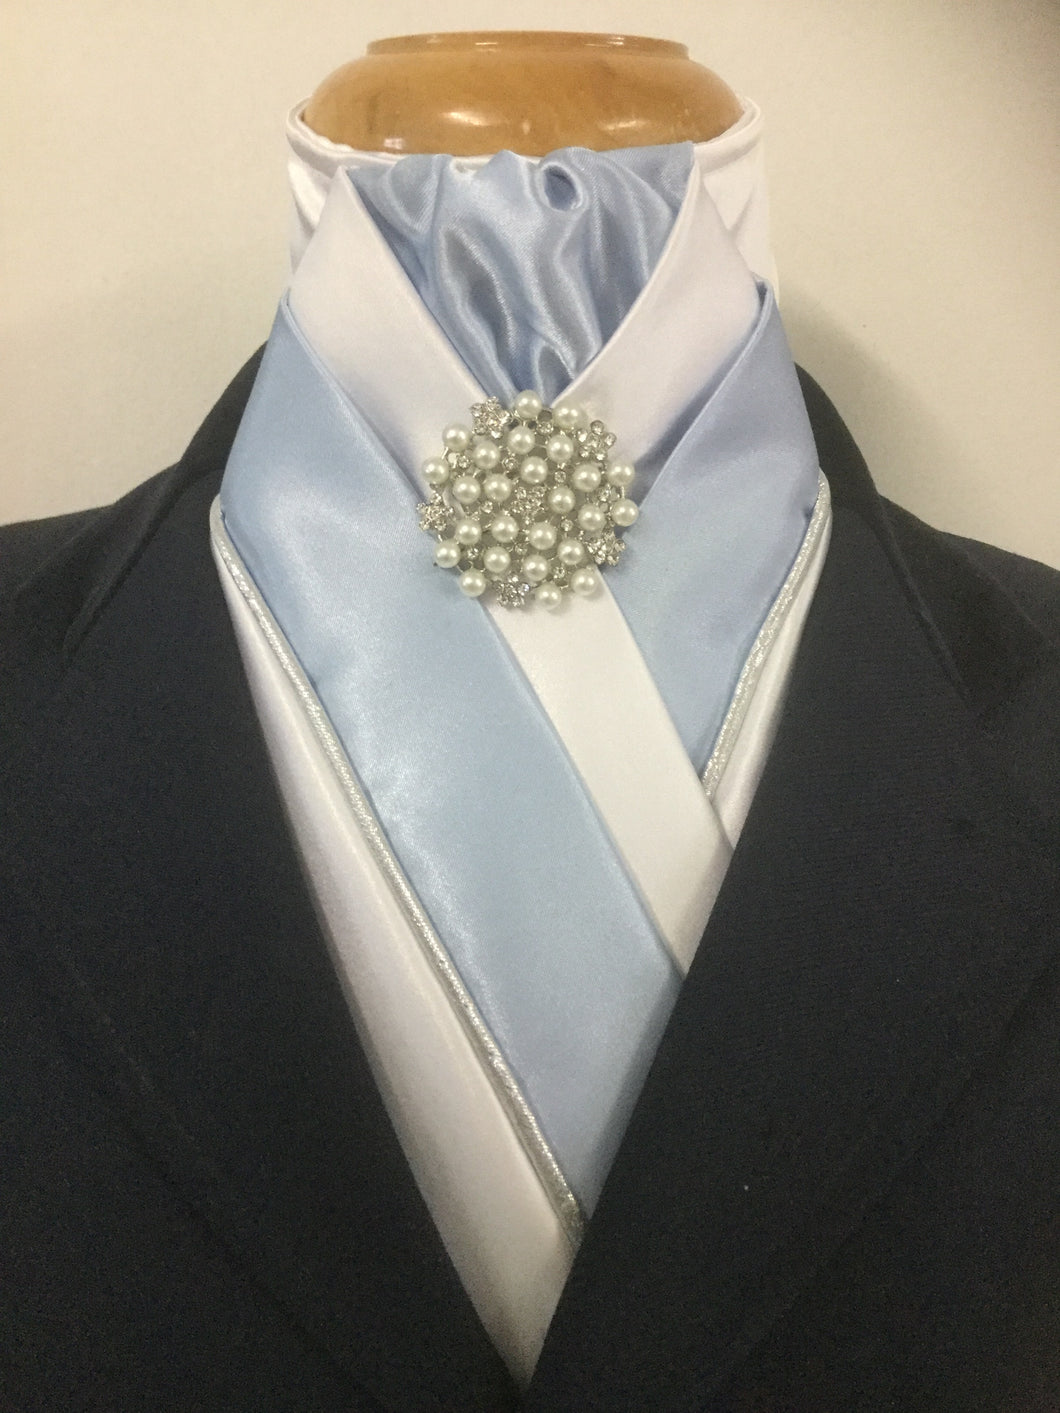 HHD ‘The Royal’ Equestrian Stock Tie White Satin, Light Blue & Silver with Pearls